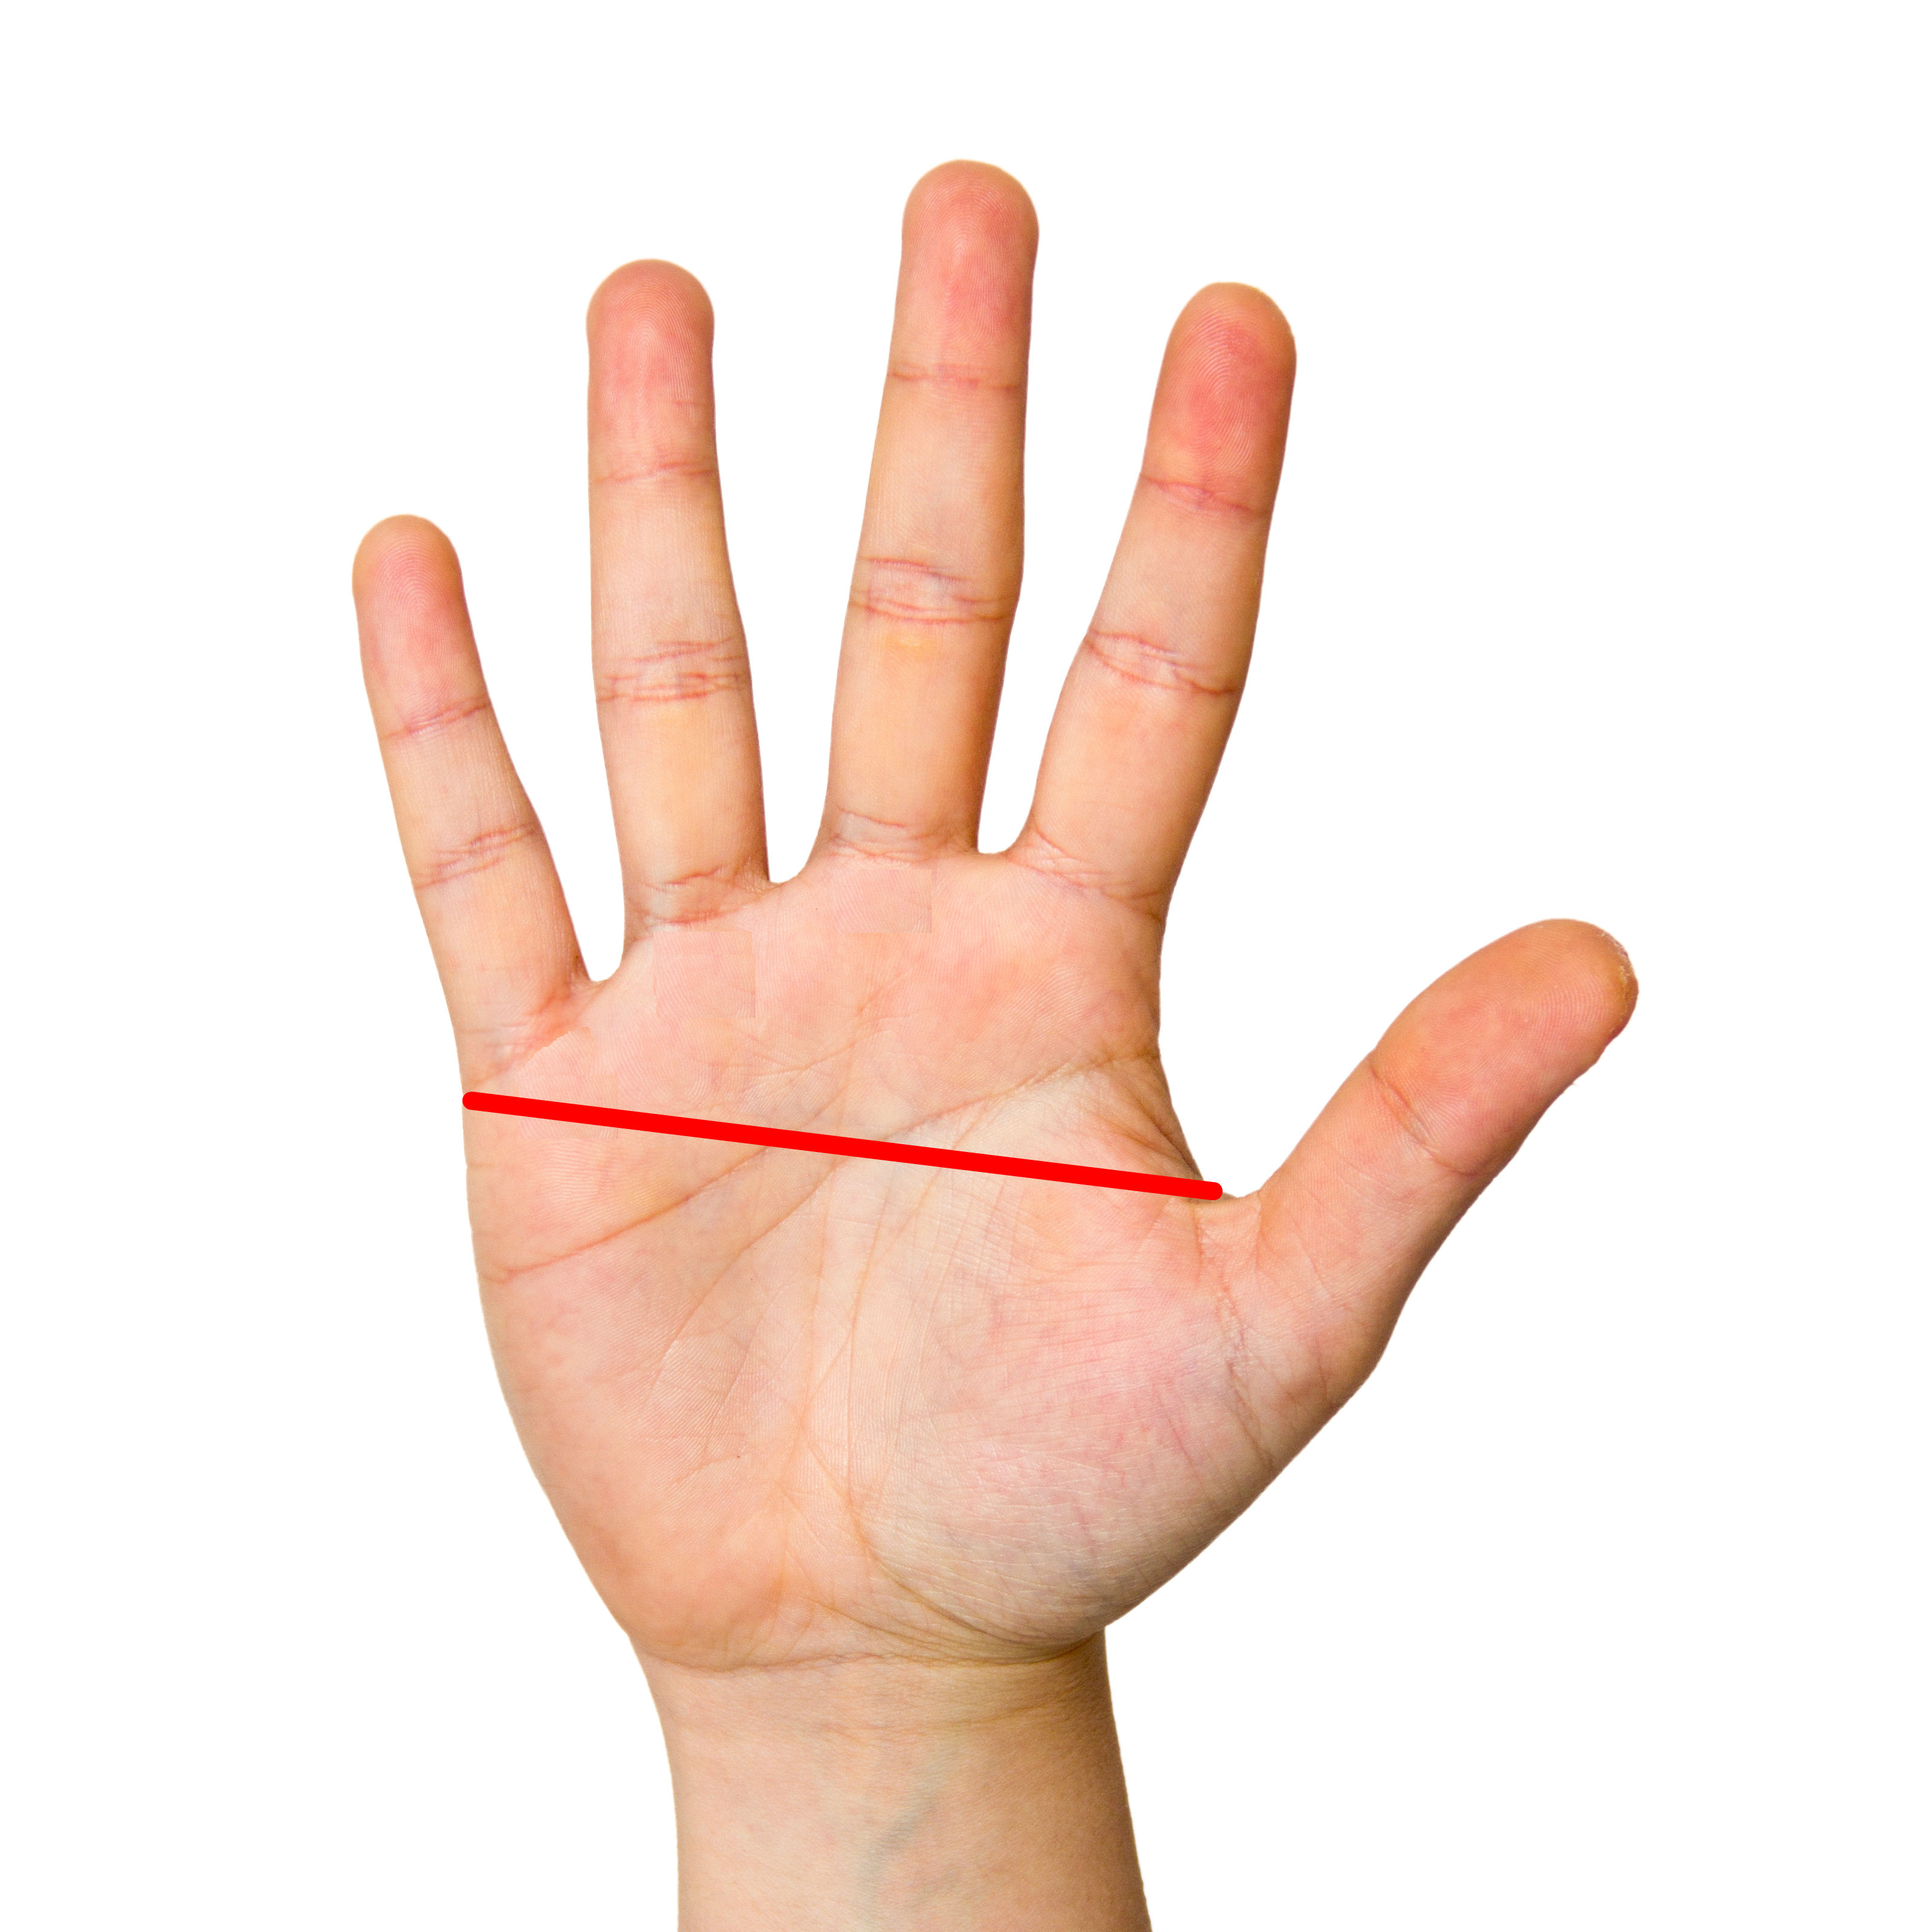 How to measure hand circumference